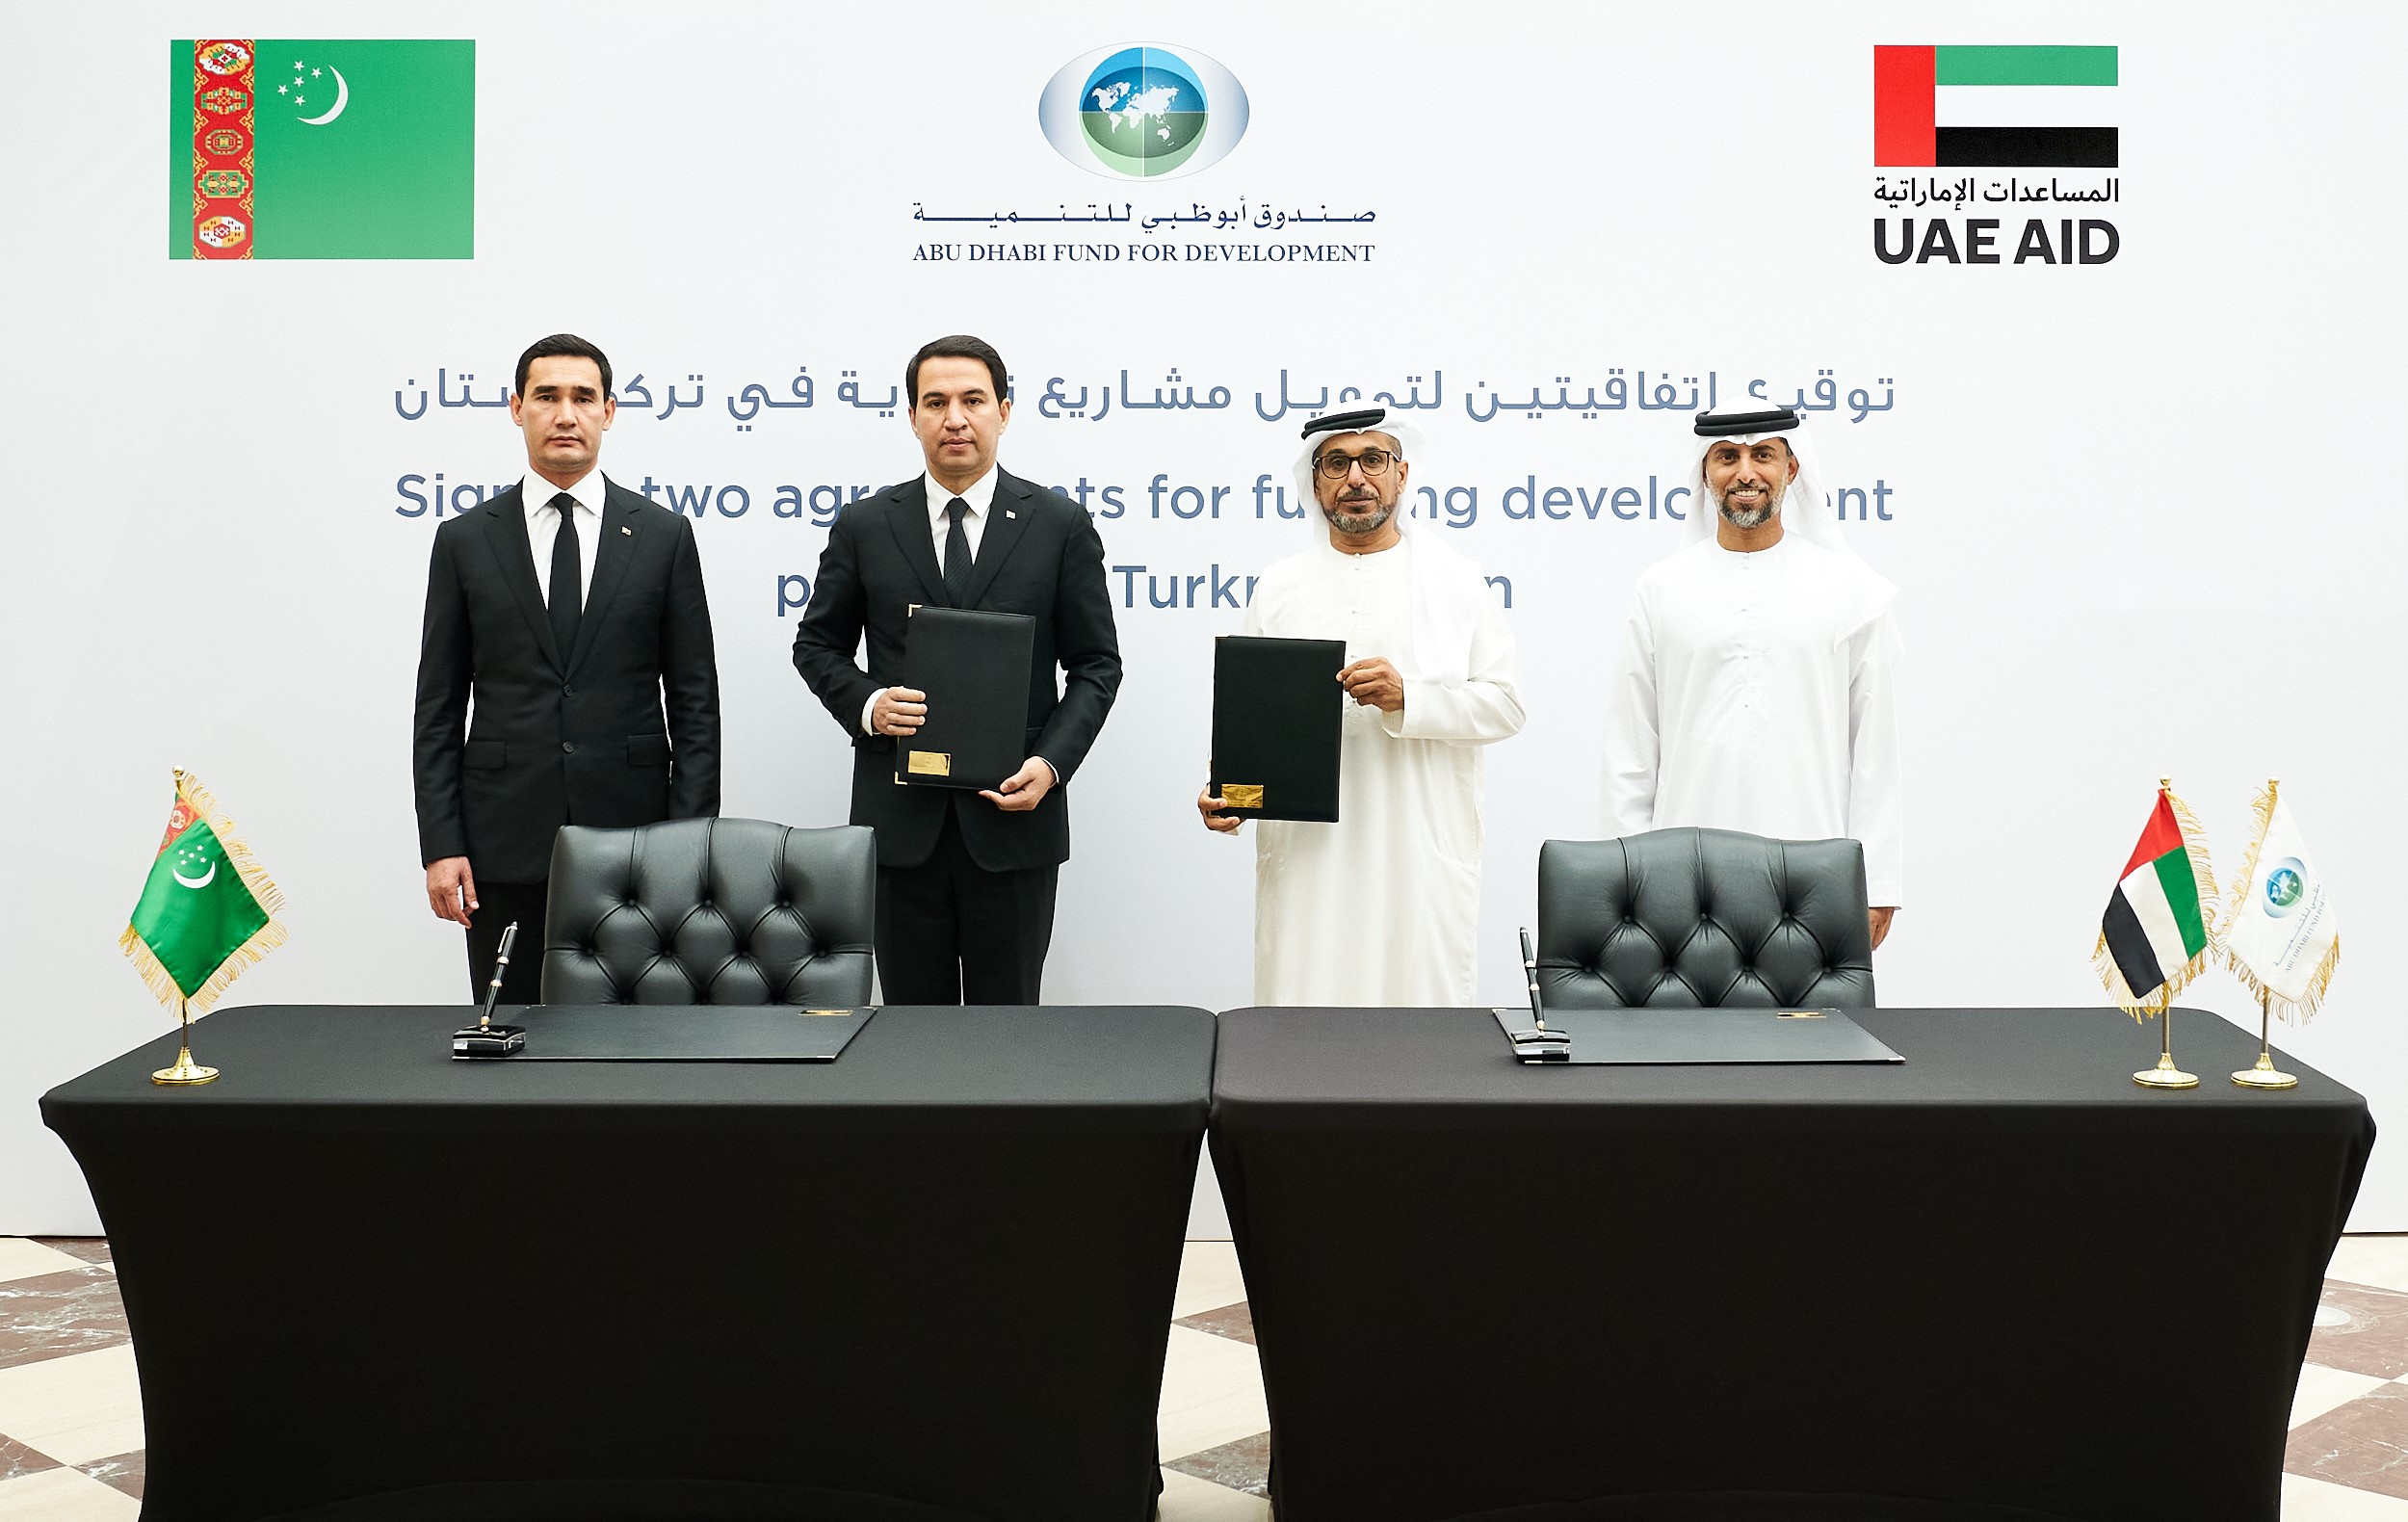 ADFD Allocates AED367 Million Towards Airport Development And Hybrid Power Plant Projects In Turkmenistan